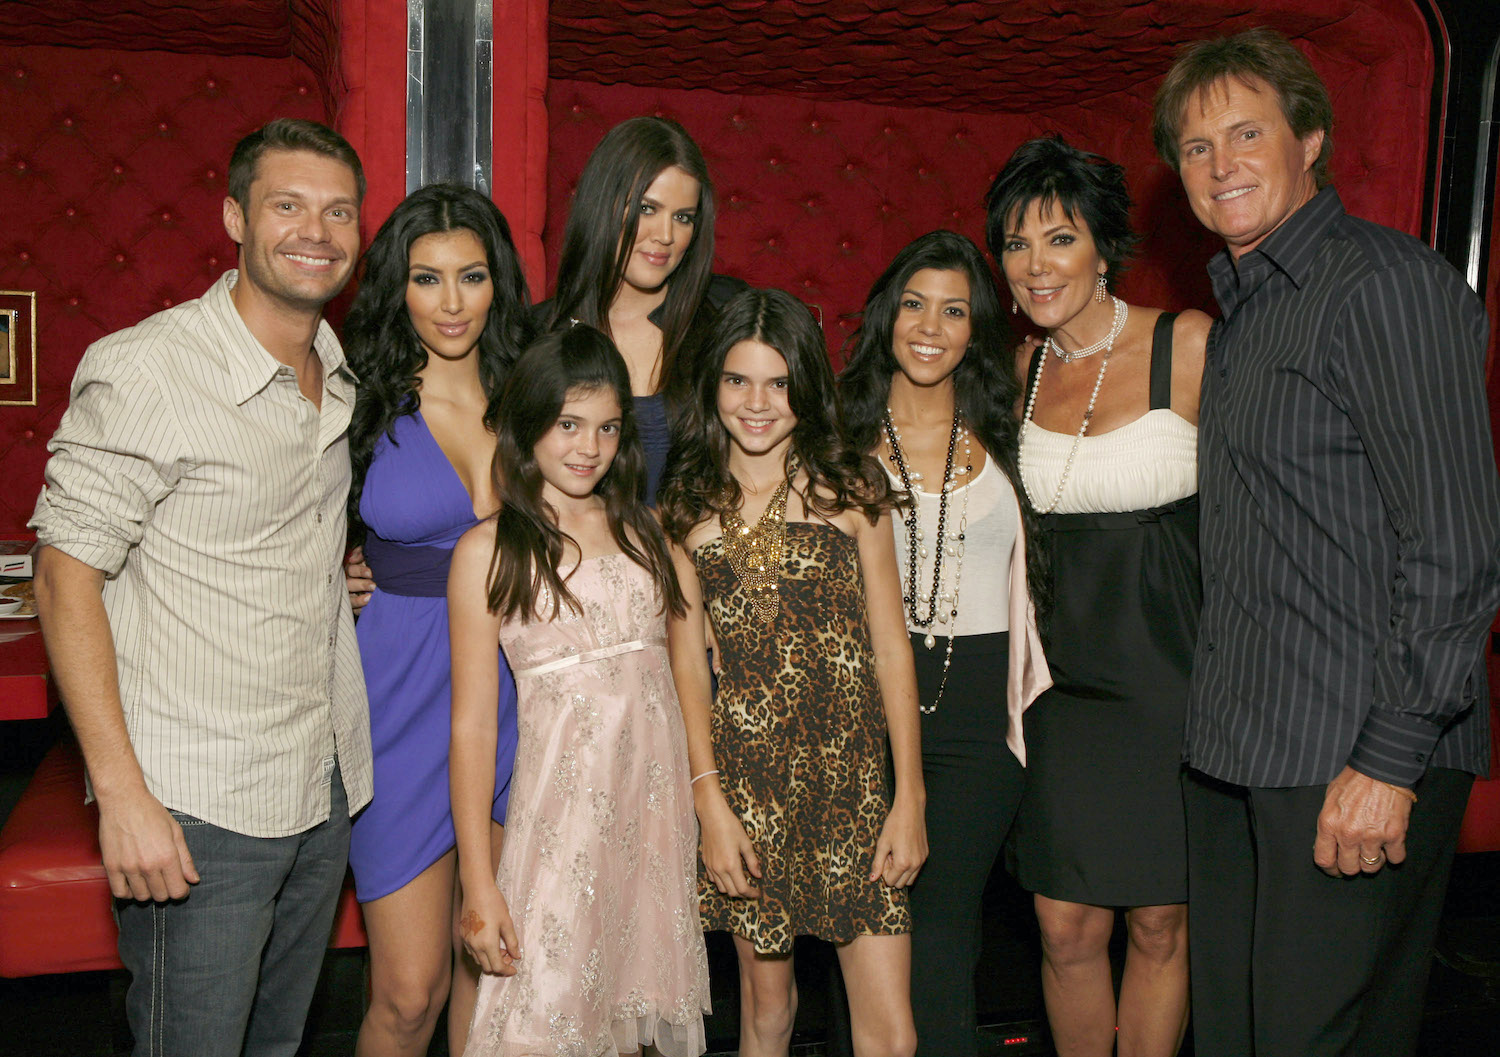 Ryan Seacrest and the cast of 'Keeping Up With the Kardashians' at the KUWTK viewing party at Chapter 8 Restaurant on October 16, 2007